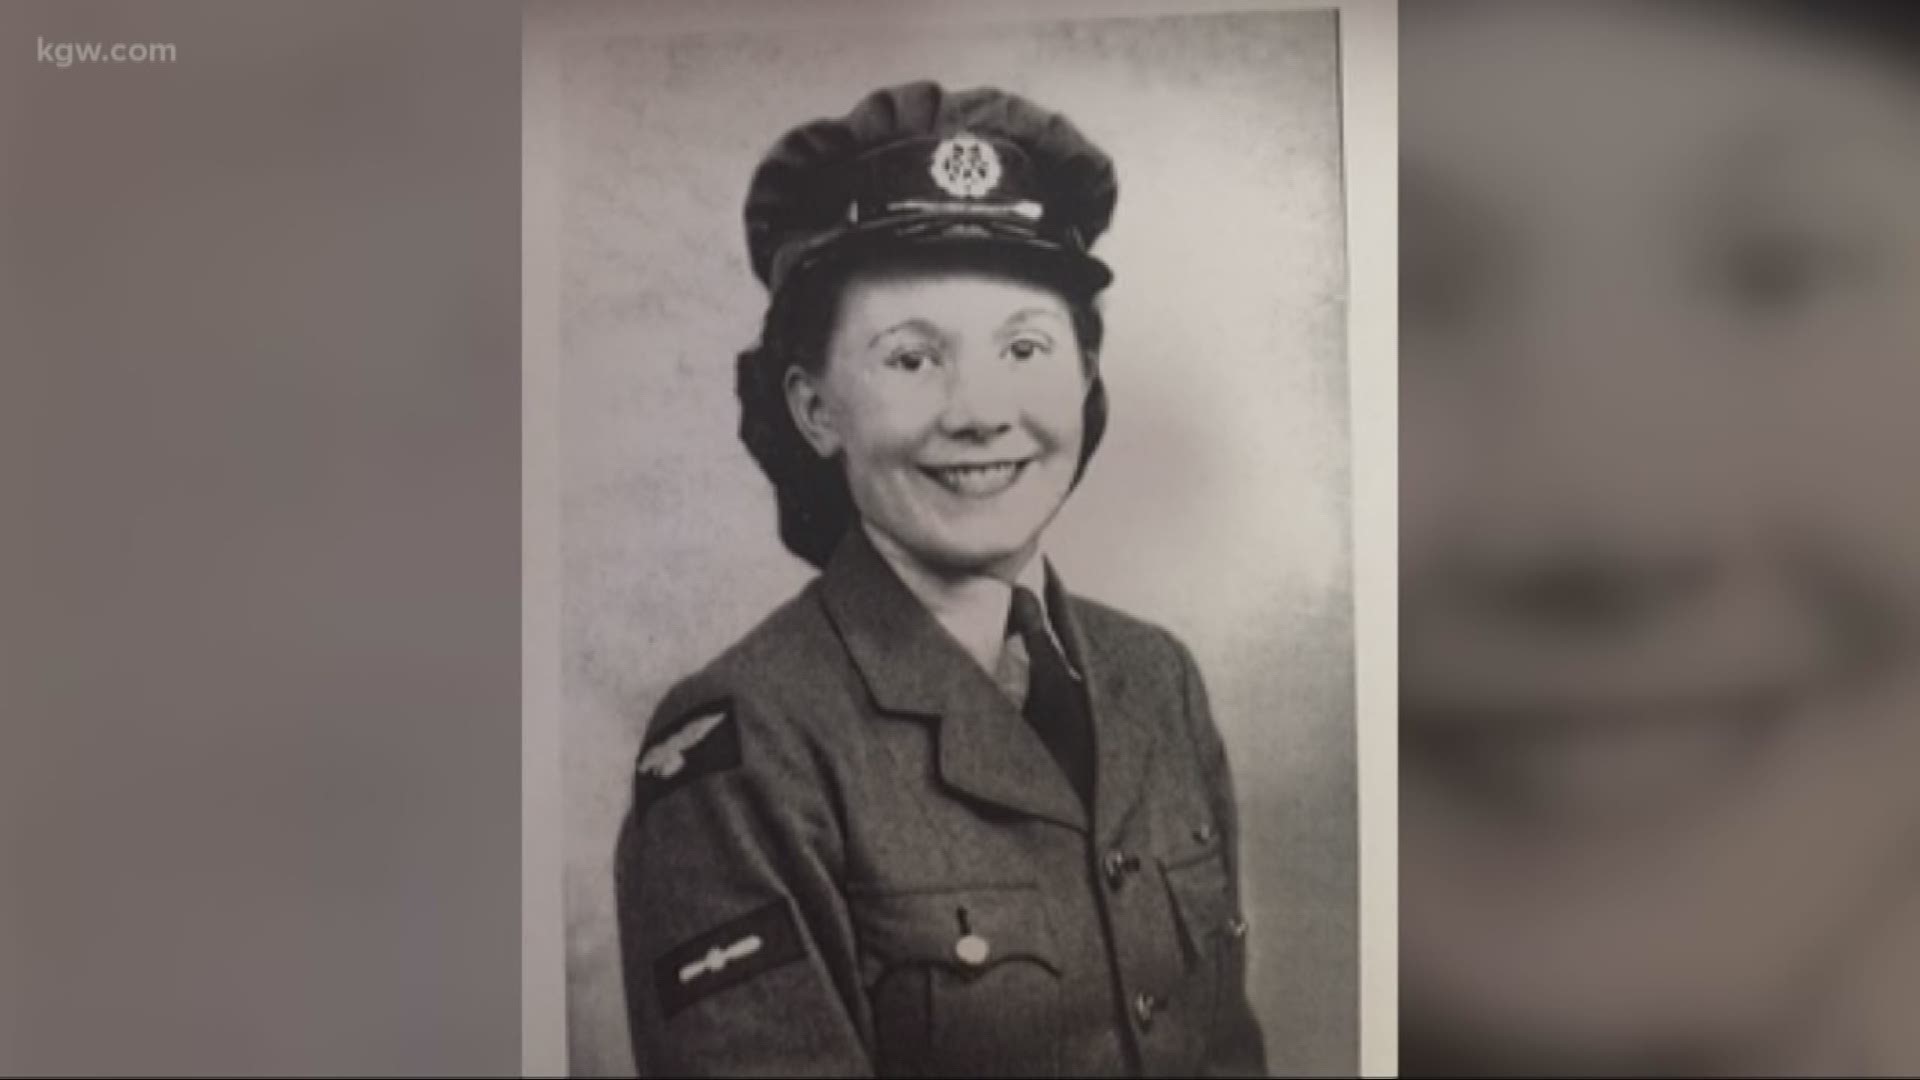 Gladys volunteered as an air raid warden and later became an accountant.